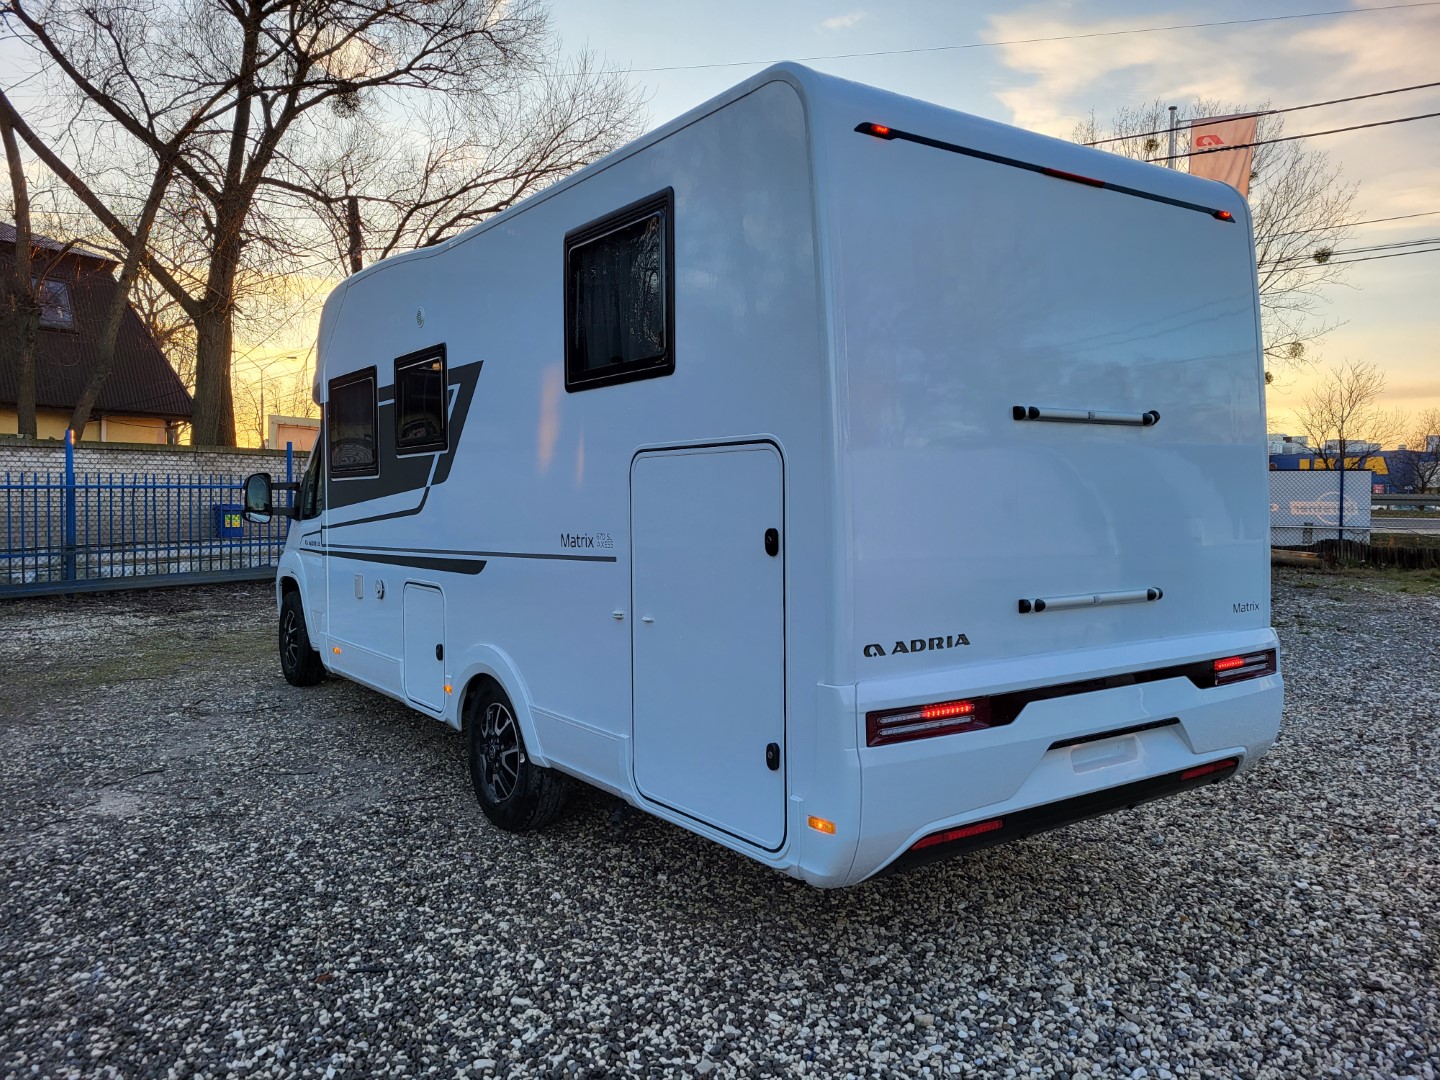 RV for sale – Find the perfect motorhome for you!